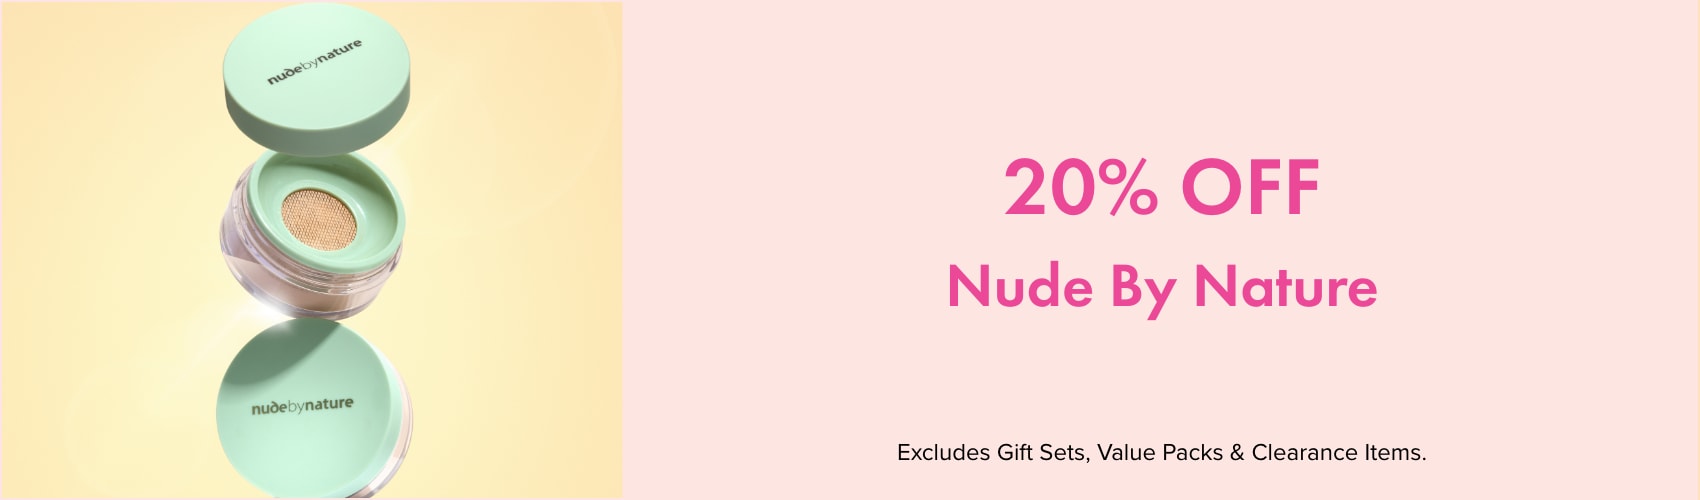 20% OFF Nude by Nature